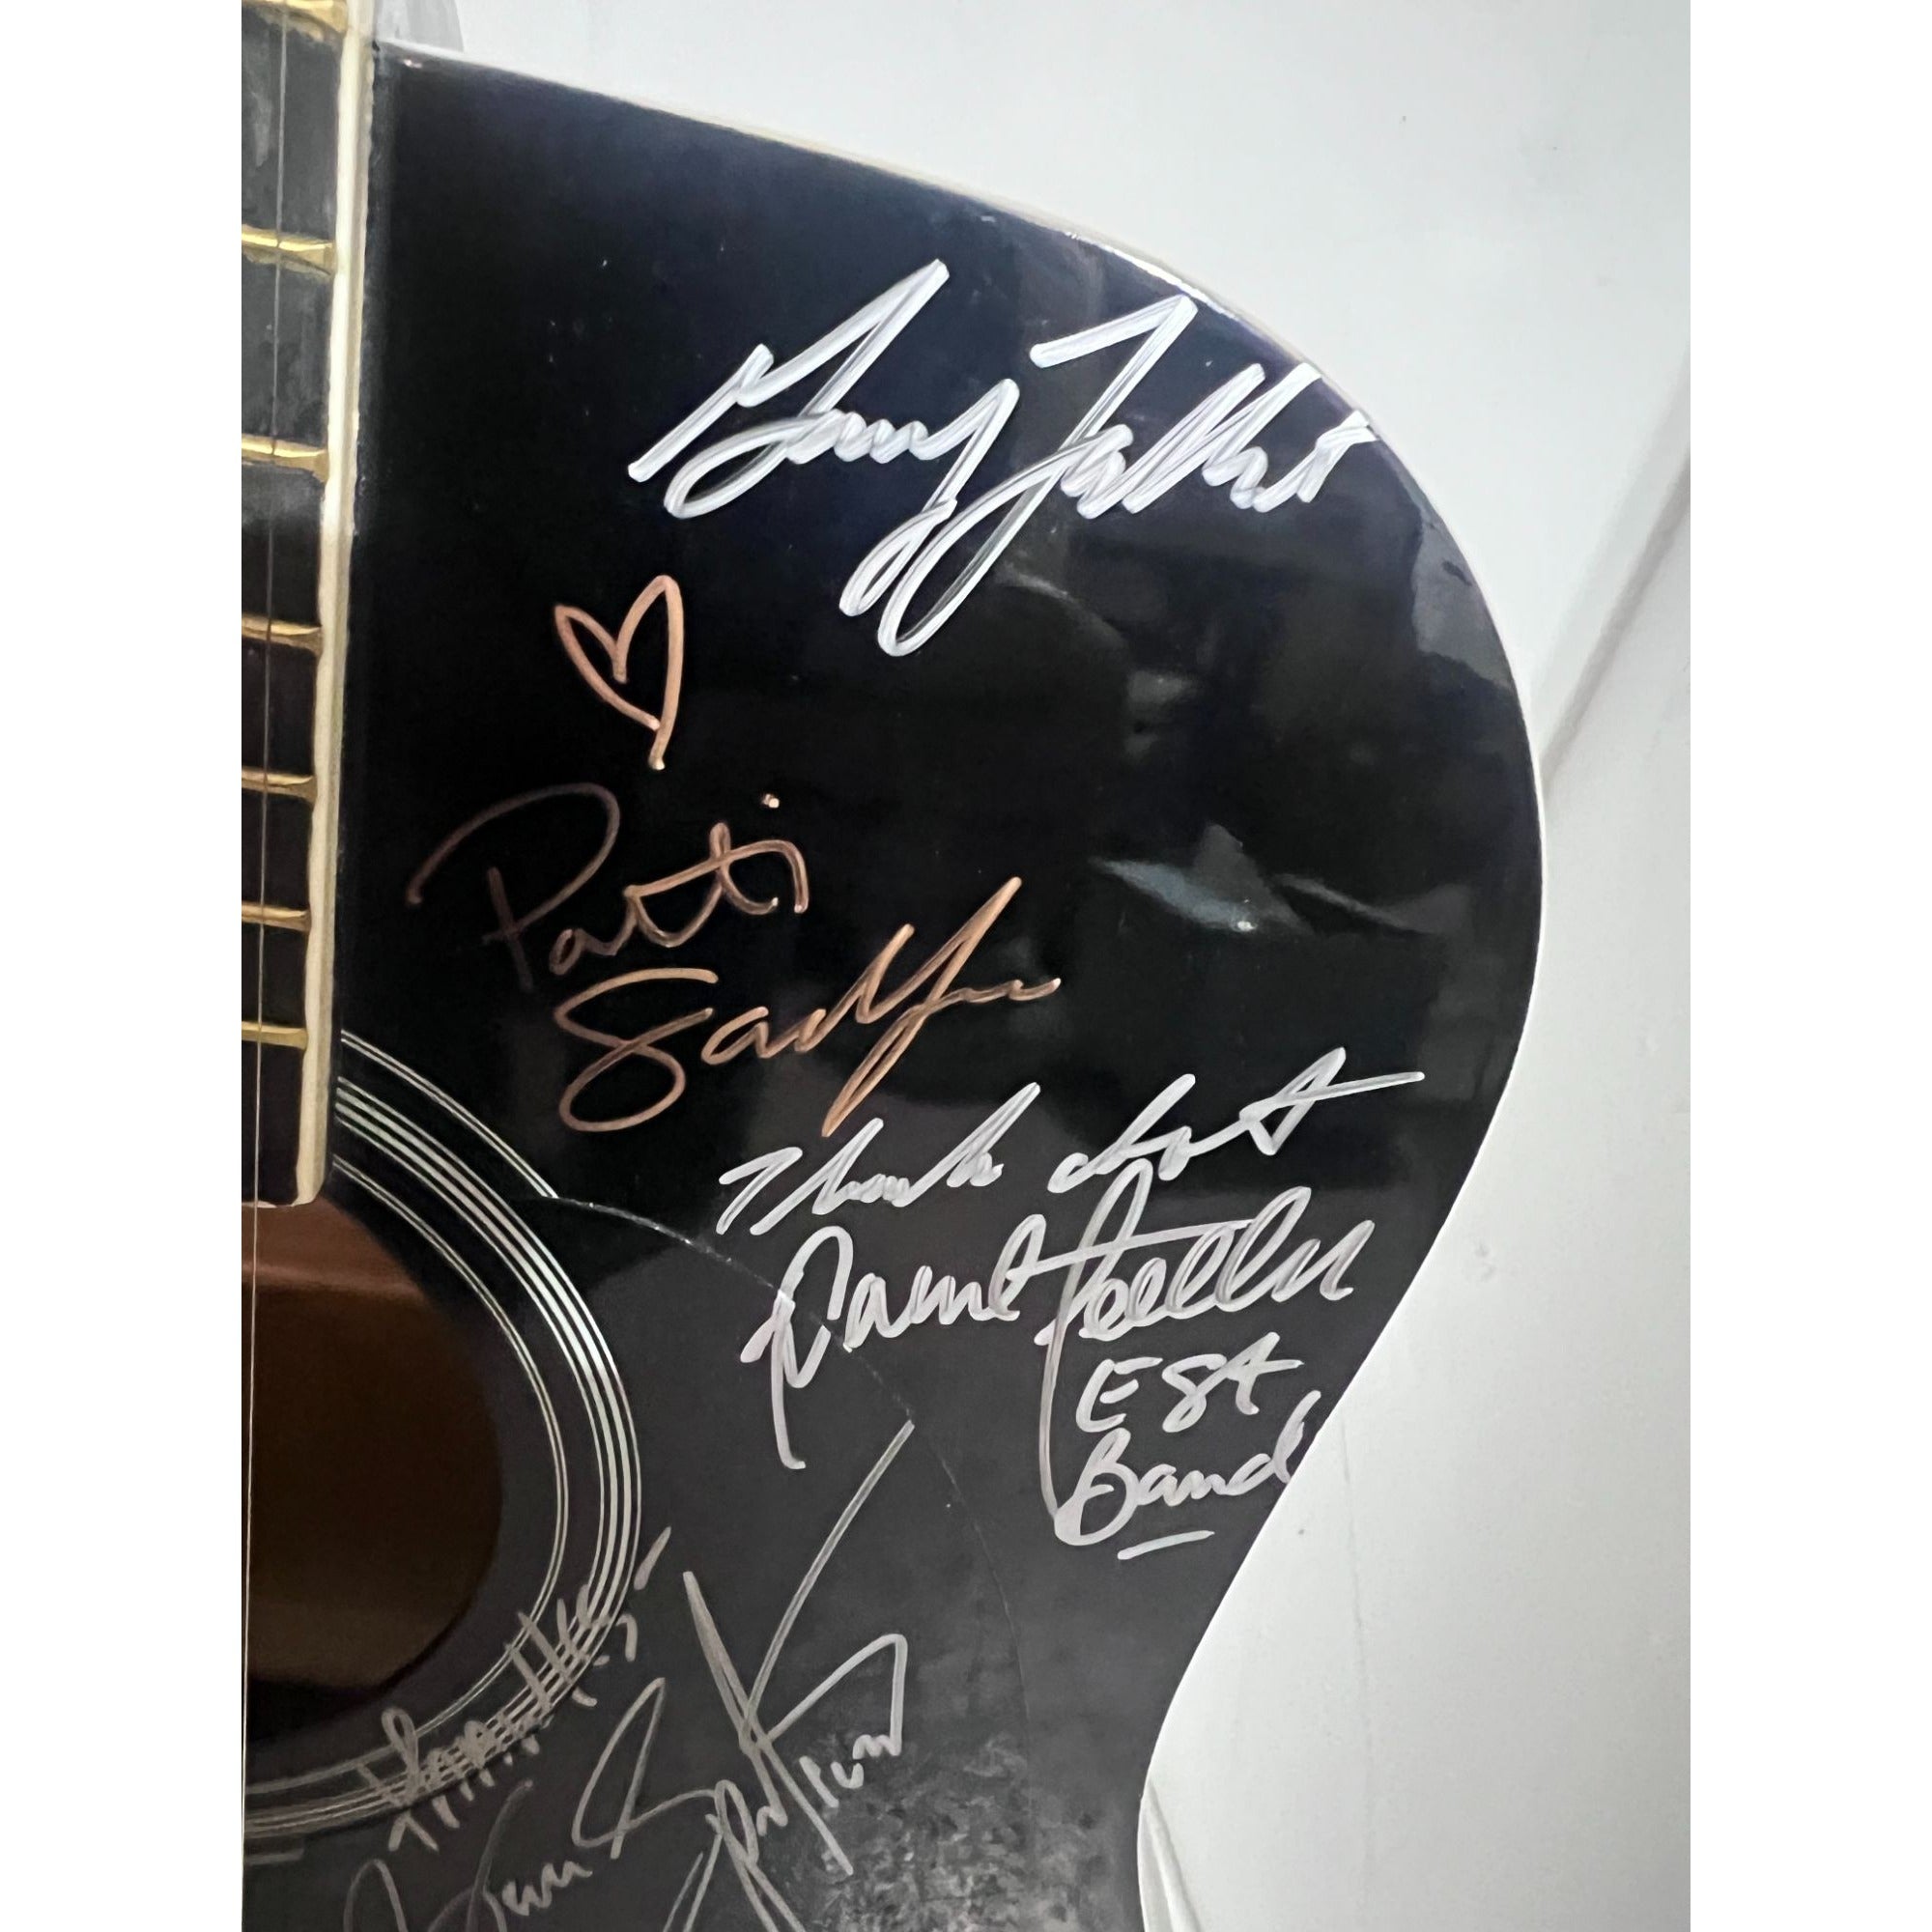 Bruce Springsteen Clarence Clemons and The E Street Band 39'' acoustic guitar signed  with proof